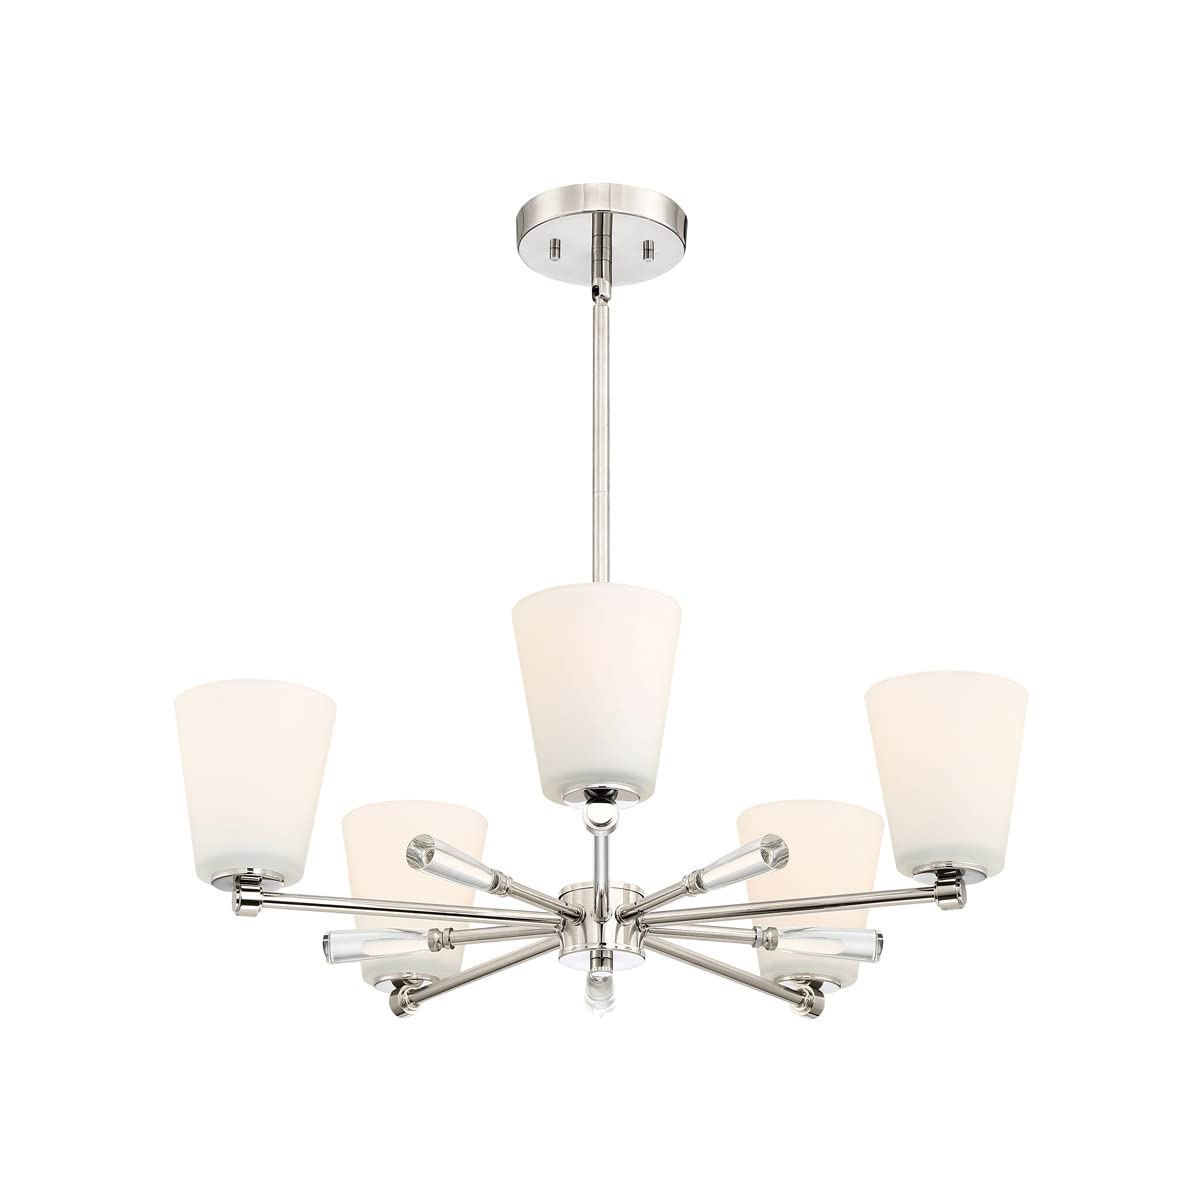 Designers Fountain 92285-PN Chandelier, Polished Nickel $36.02 + Free Shipping